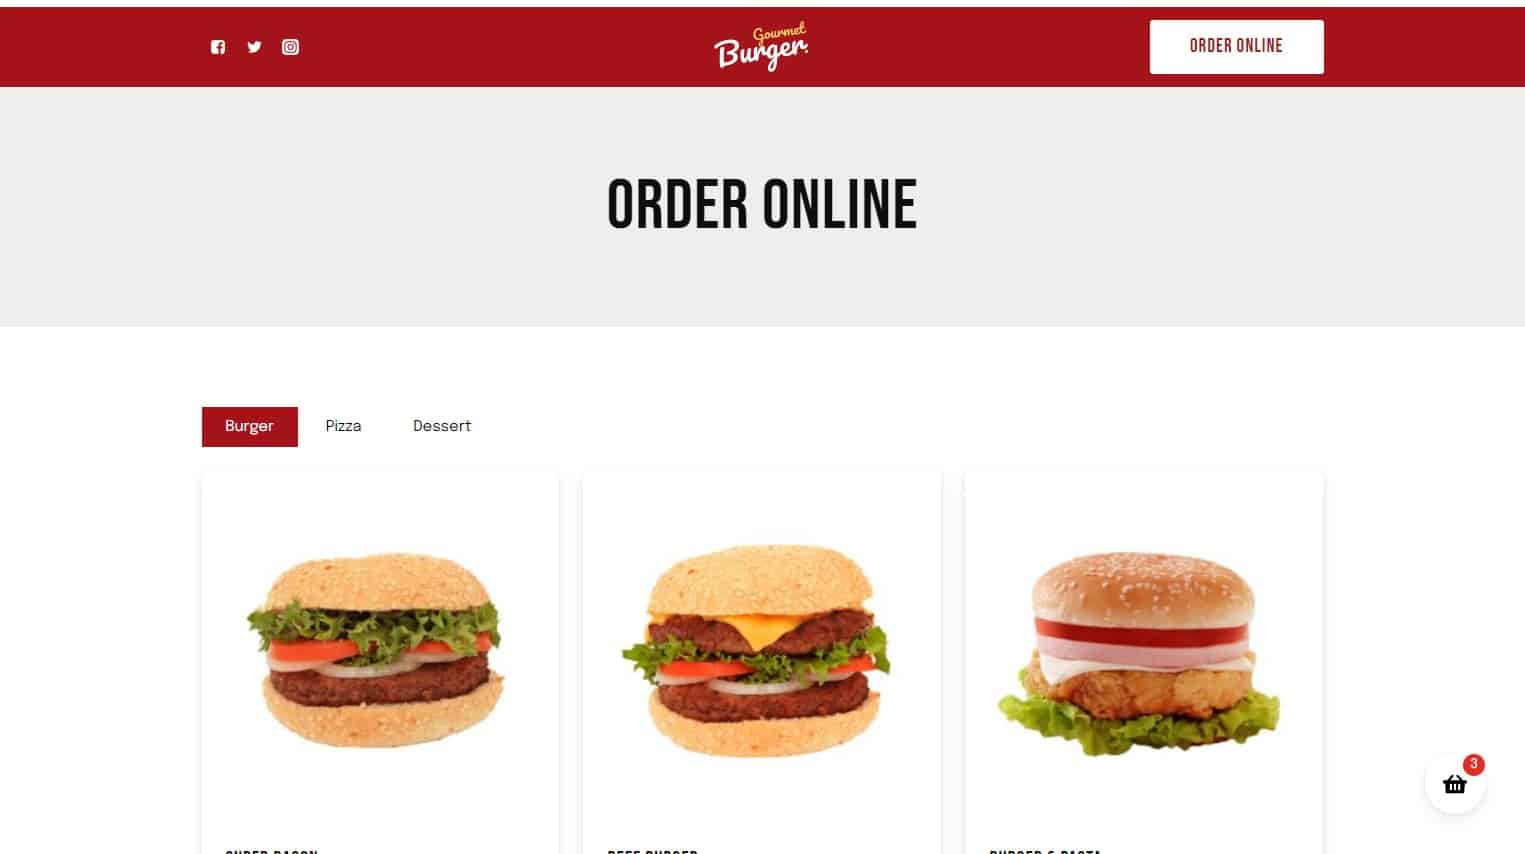 How to Create Your Food Ordering Website Using WooCommerce?